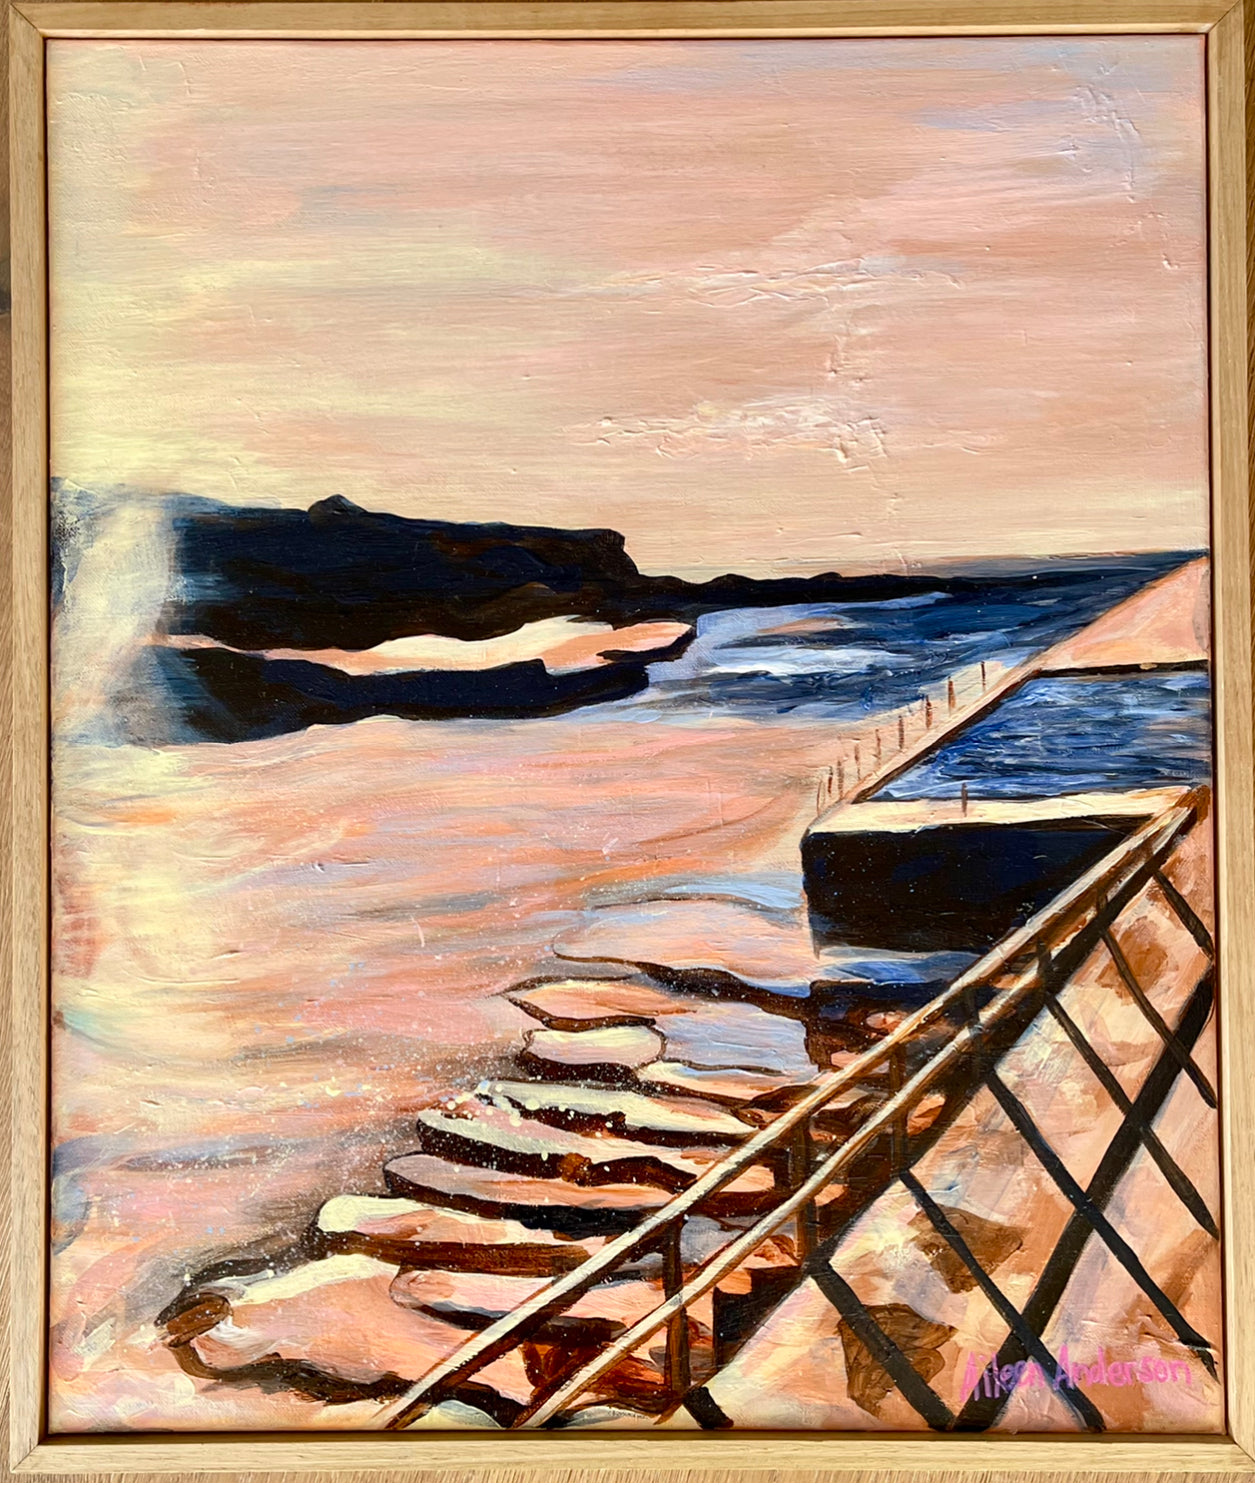 Clovelly Beach Painting, Warm from the Winter Sun by Aileen Anderson 